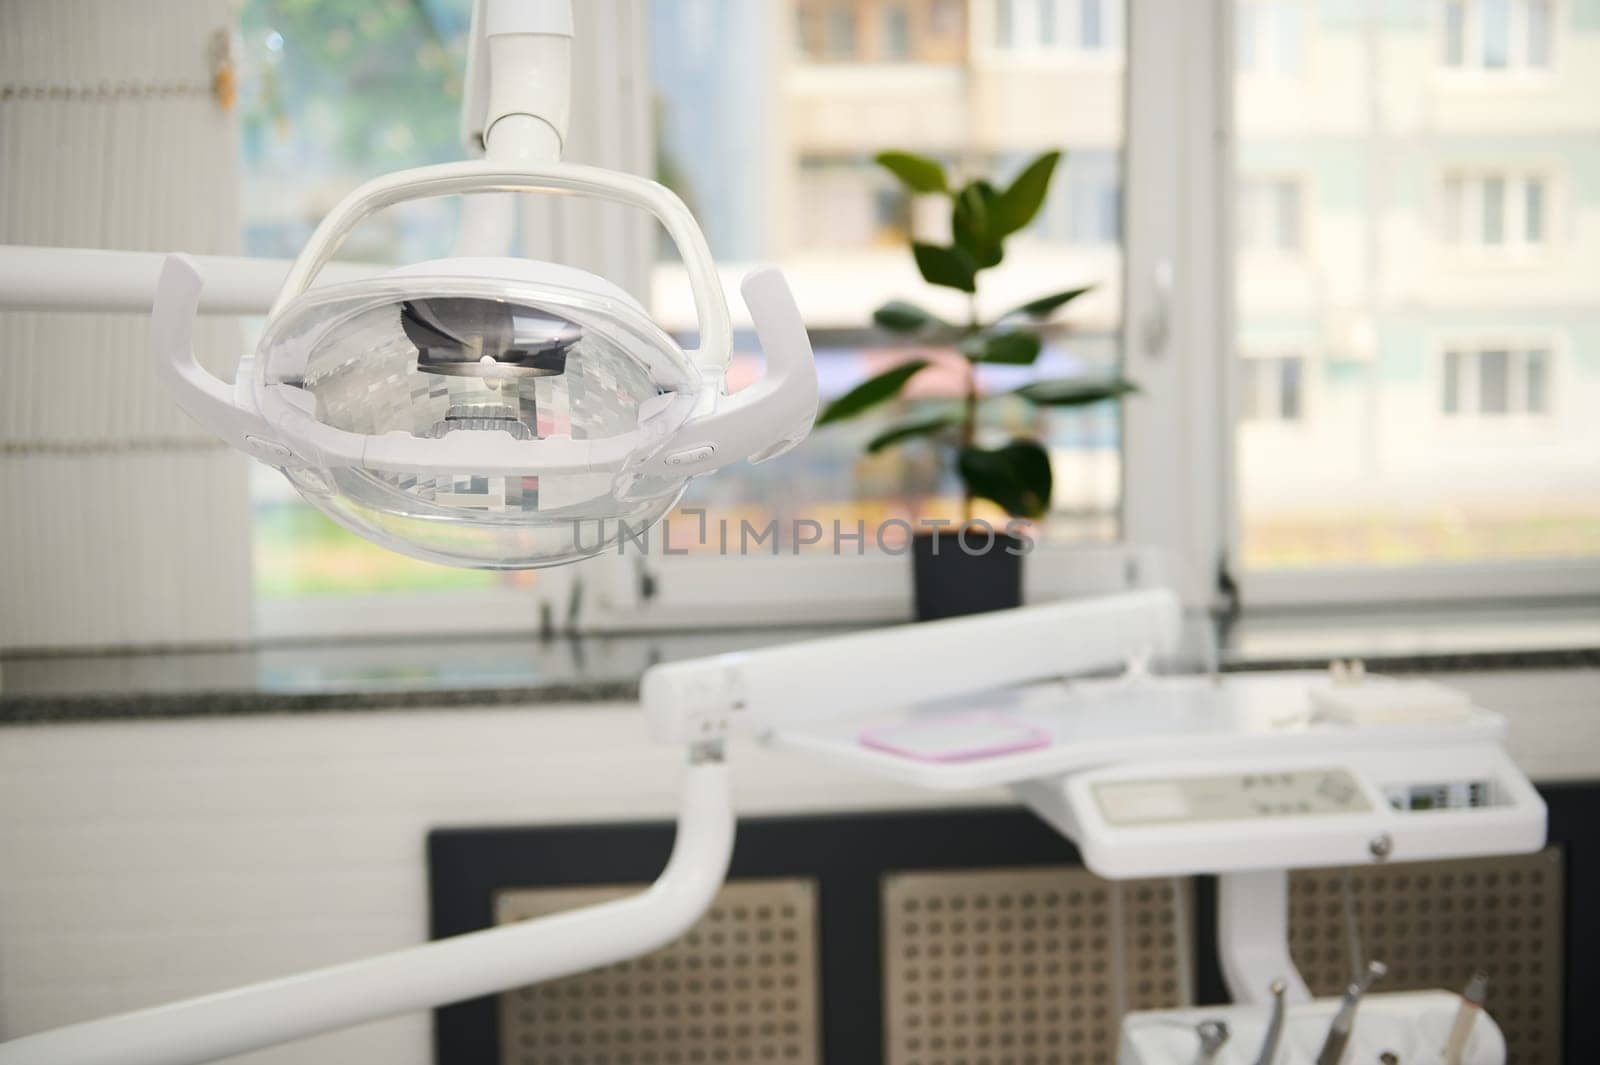 Dental office interior. Dental equipment. Operating surgical lamp with directional LED light in modern dentistry clinic by artgf